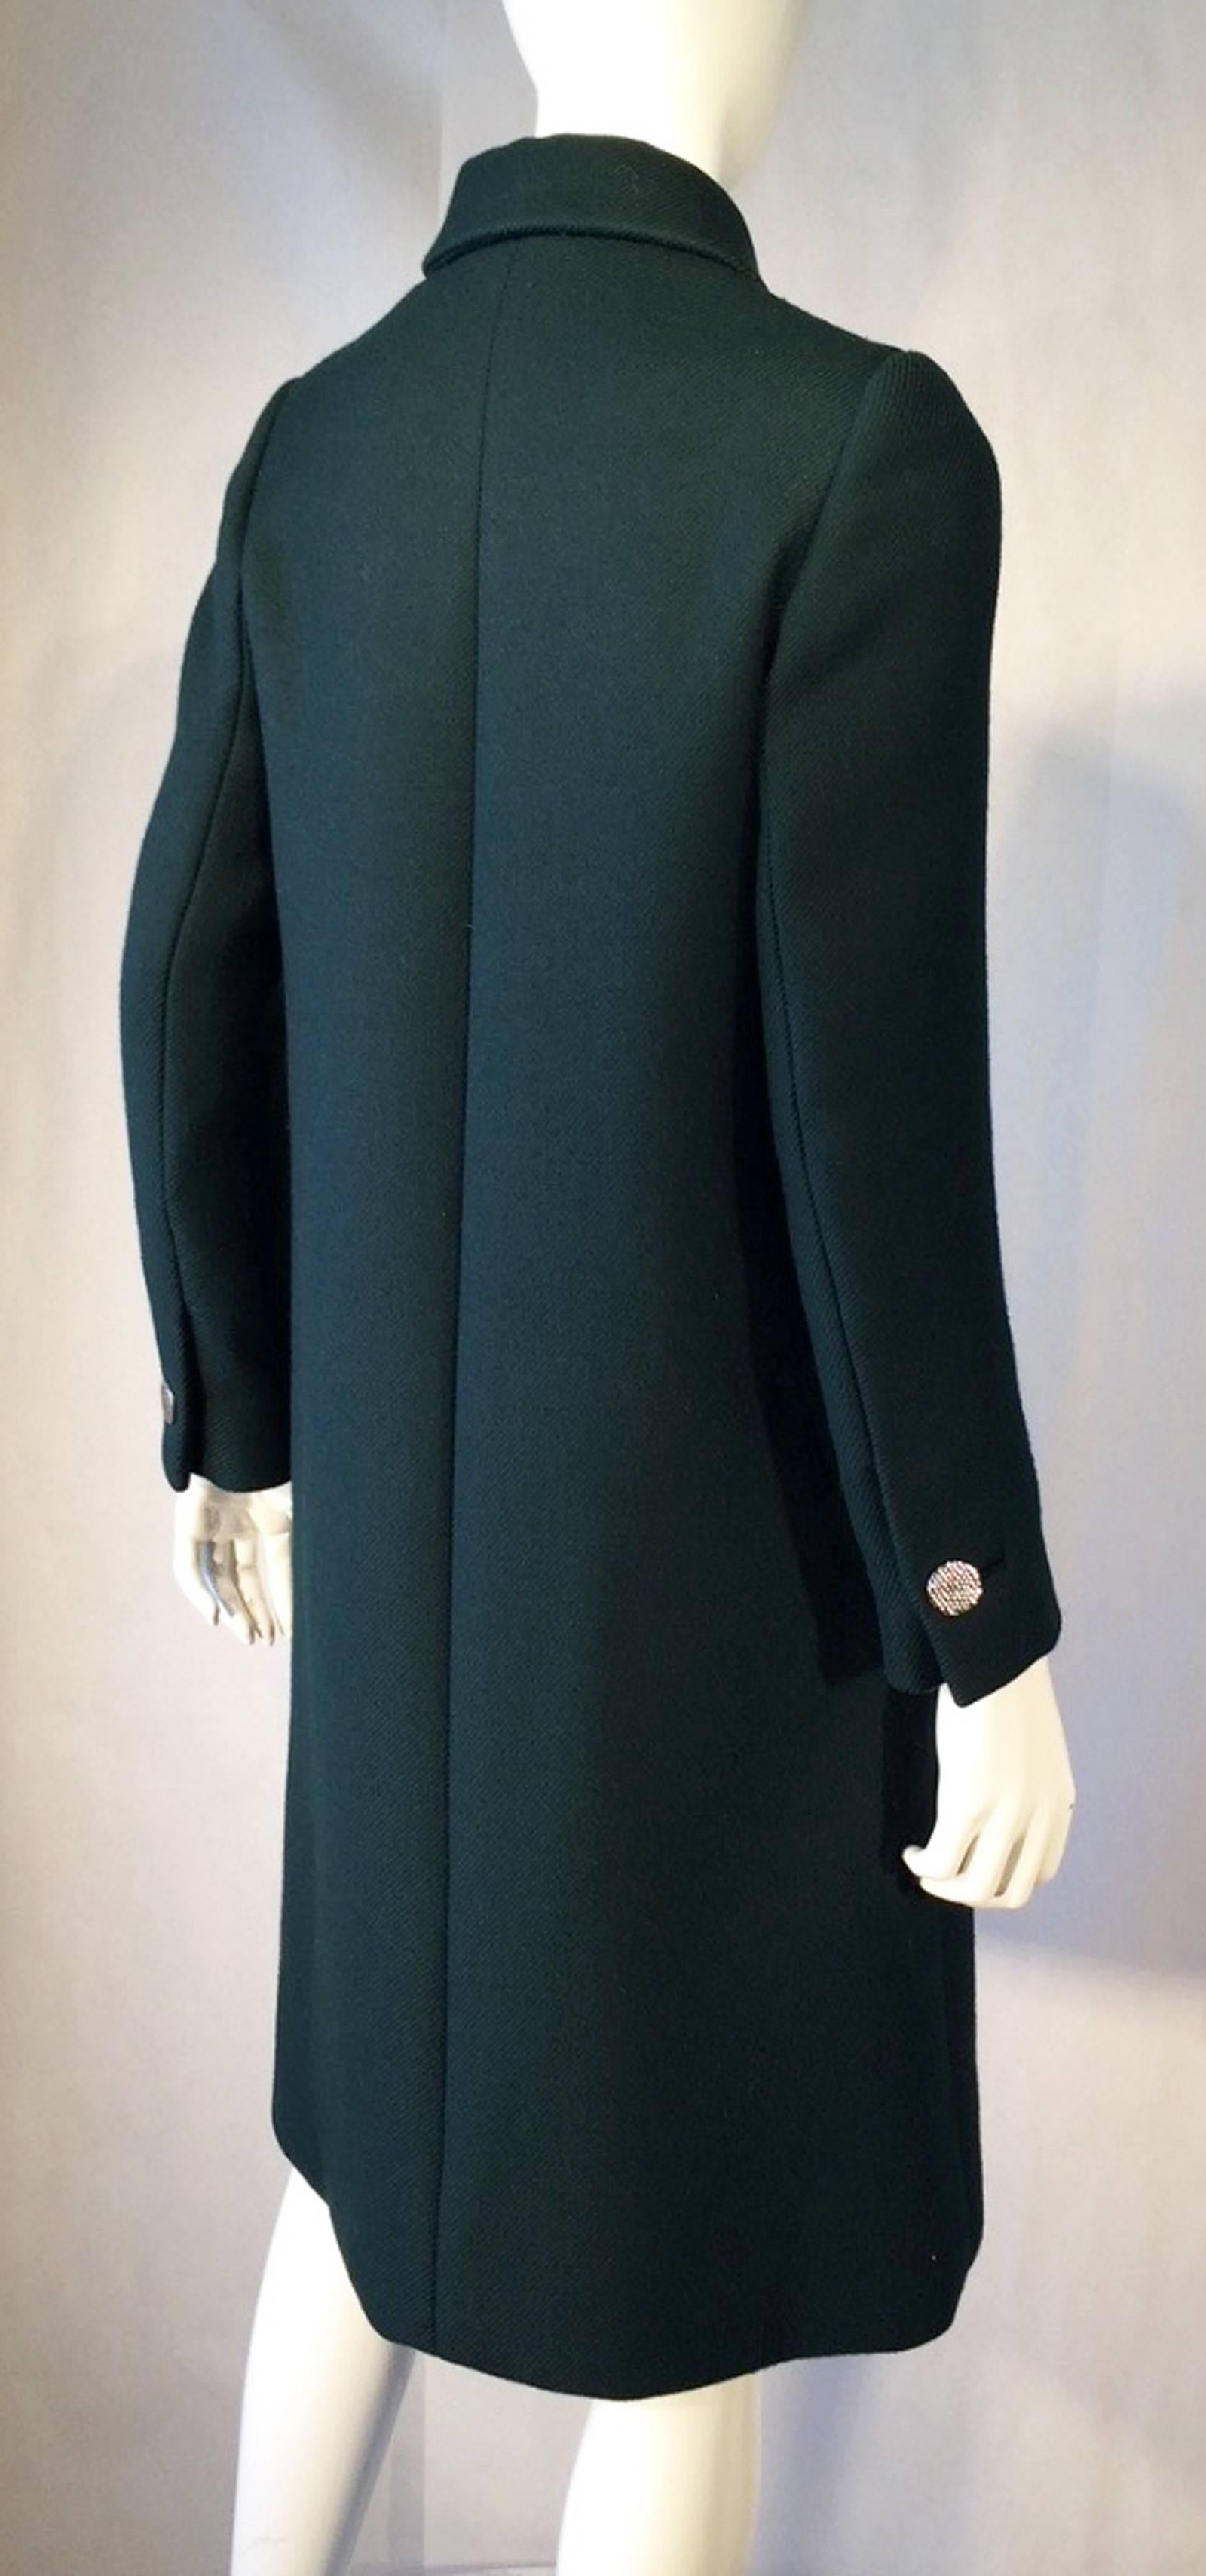 Norman Norell Military Coat, 1960s In Excellent Condition For Sale In Phoenix, AZ